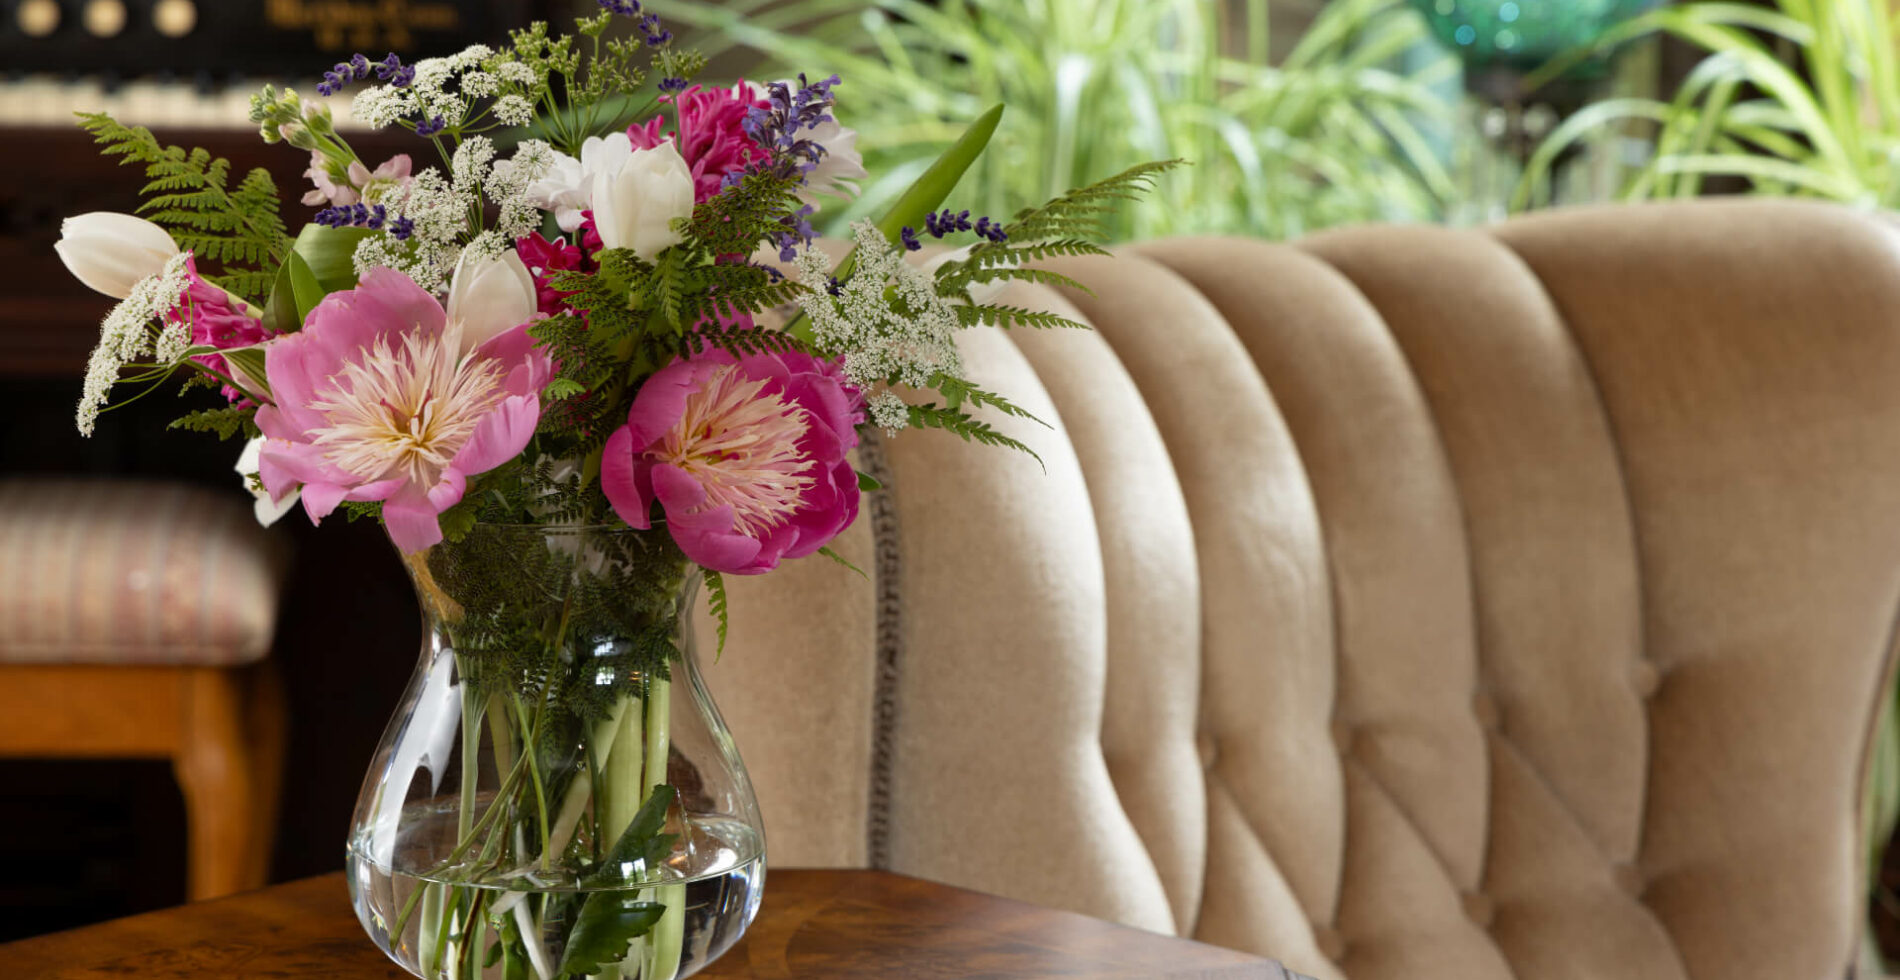 A clear vase with a bouquet of colorful flowers and greenery on a small table next to a plush tan armchair.